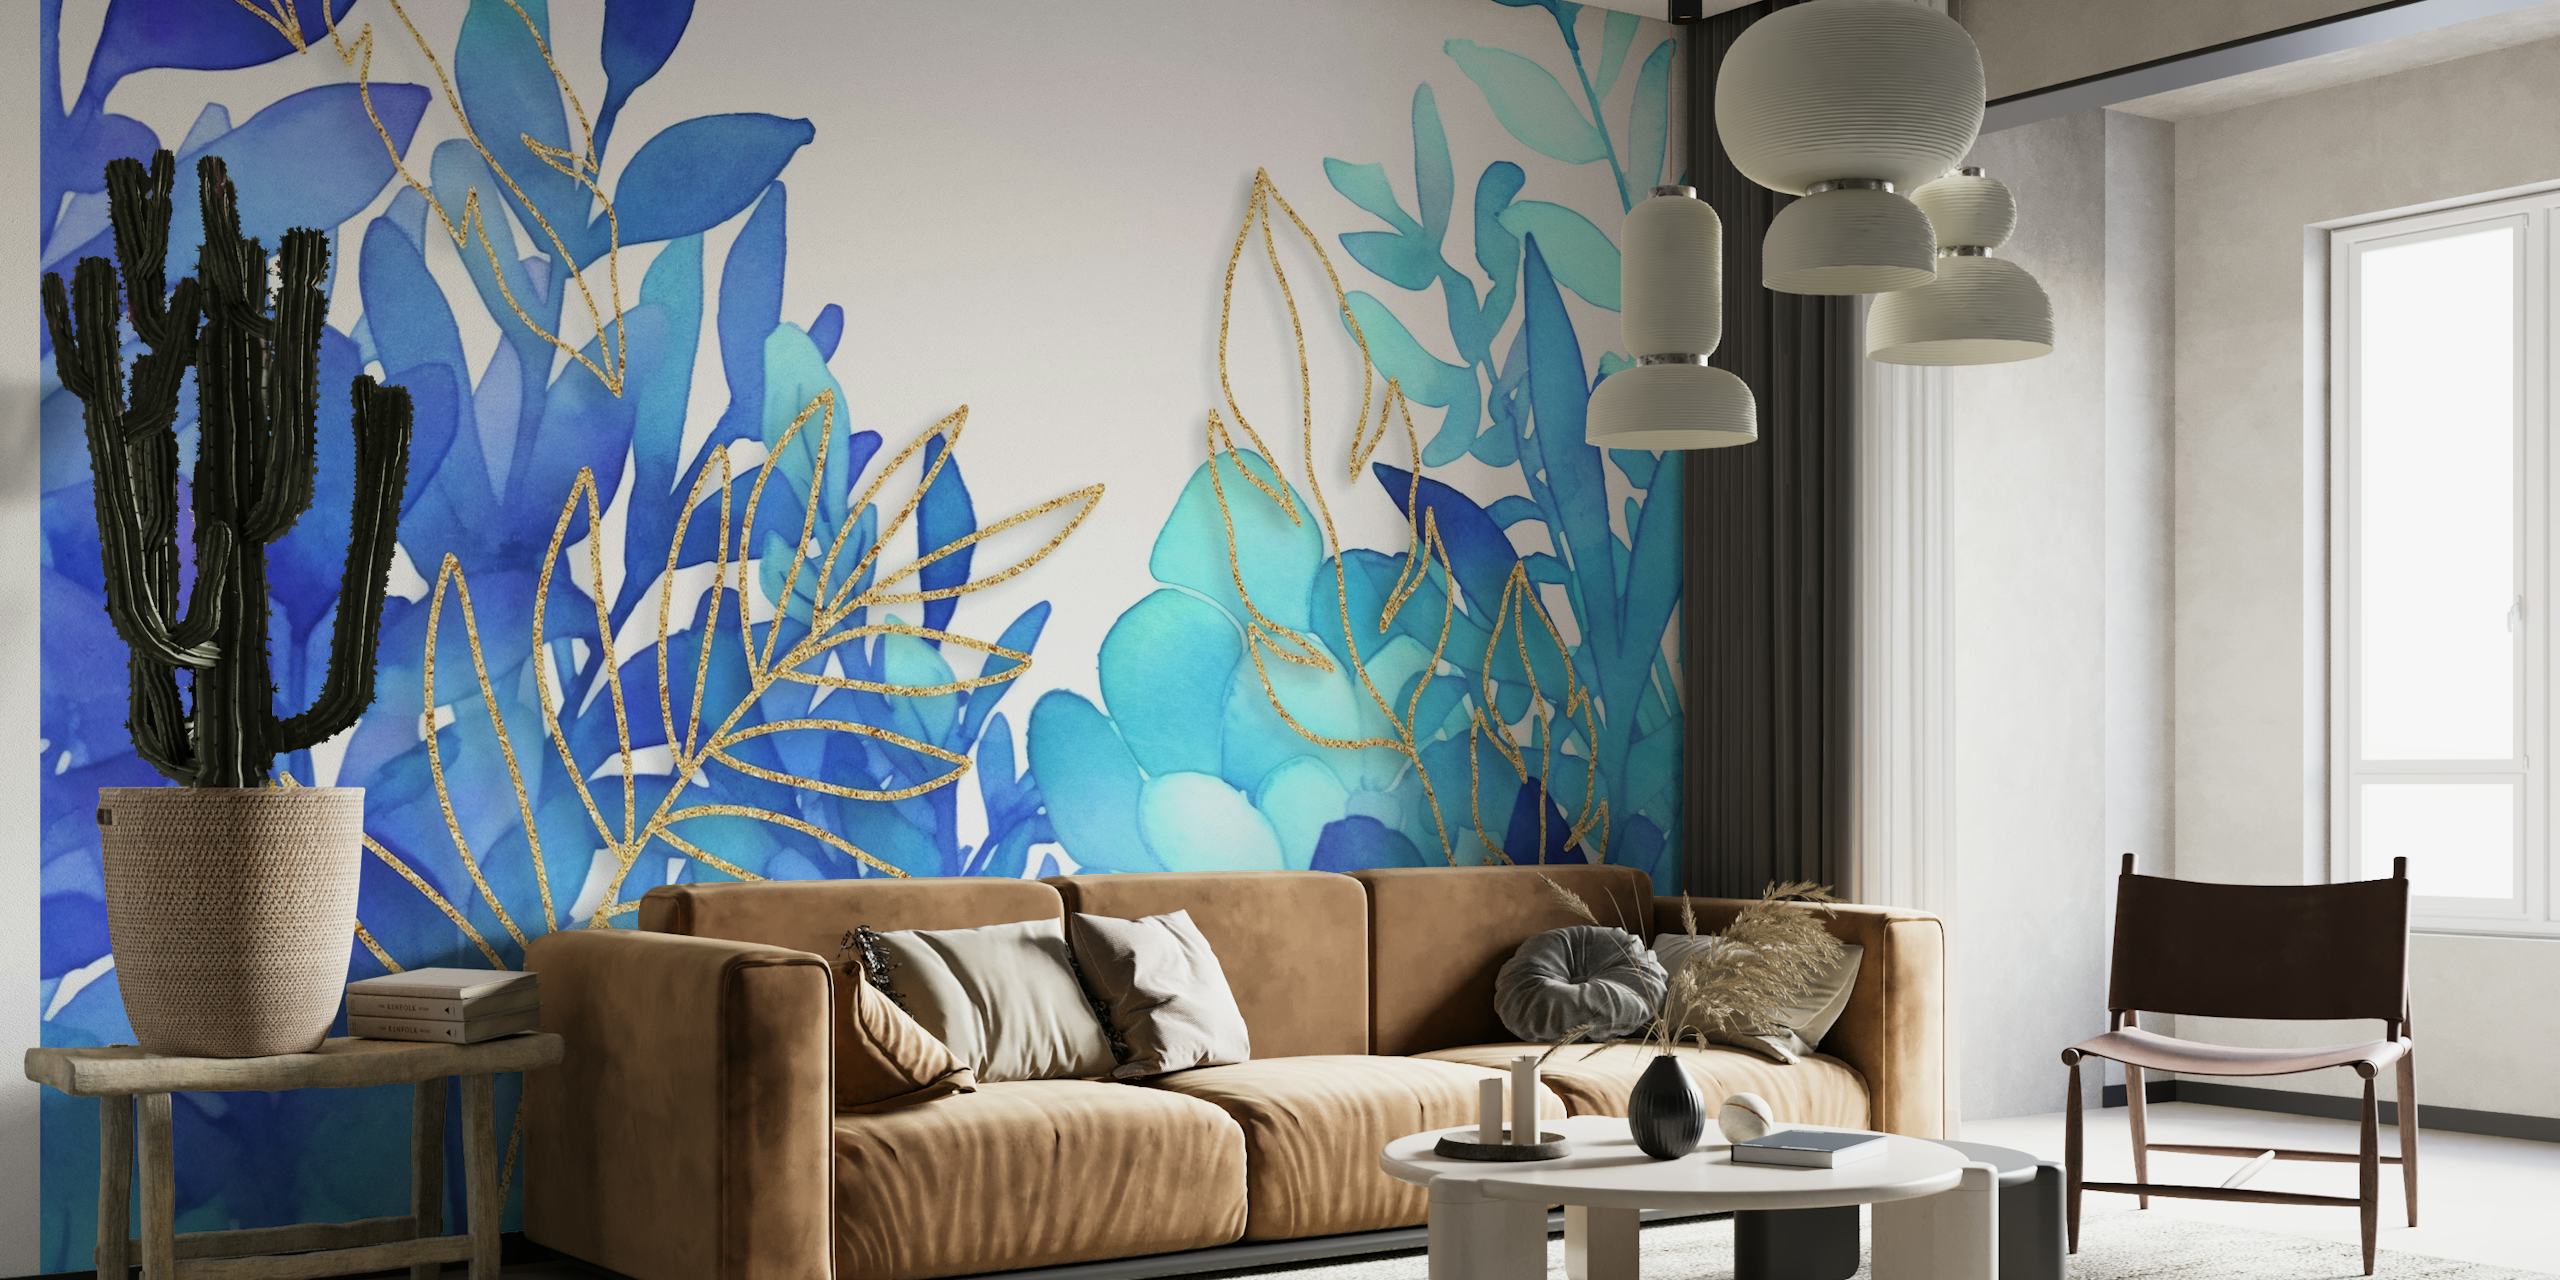 Turquoise Blue Foliage With Gold Lines wallpaper